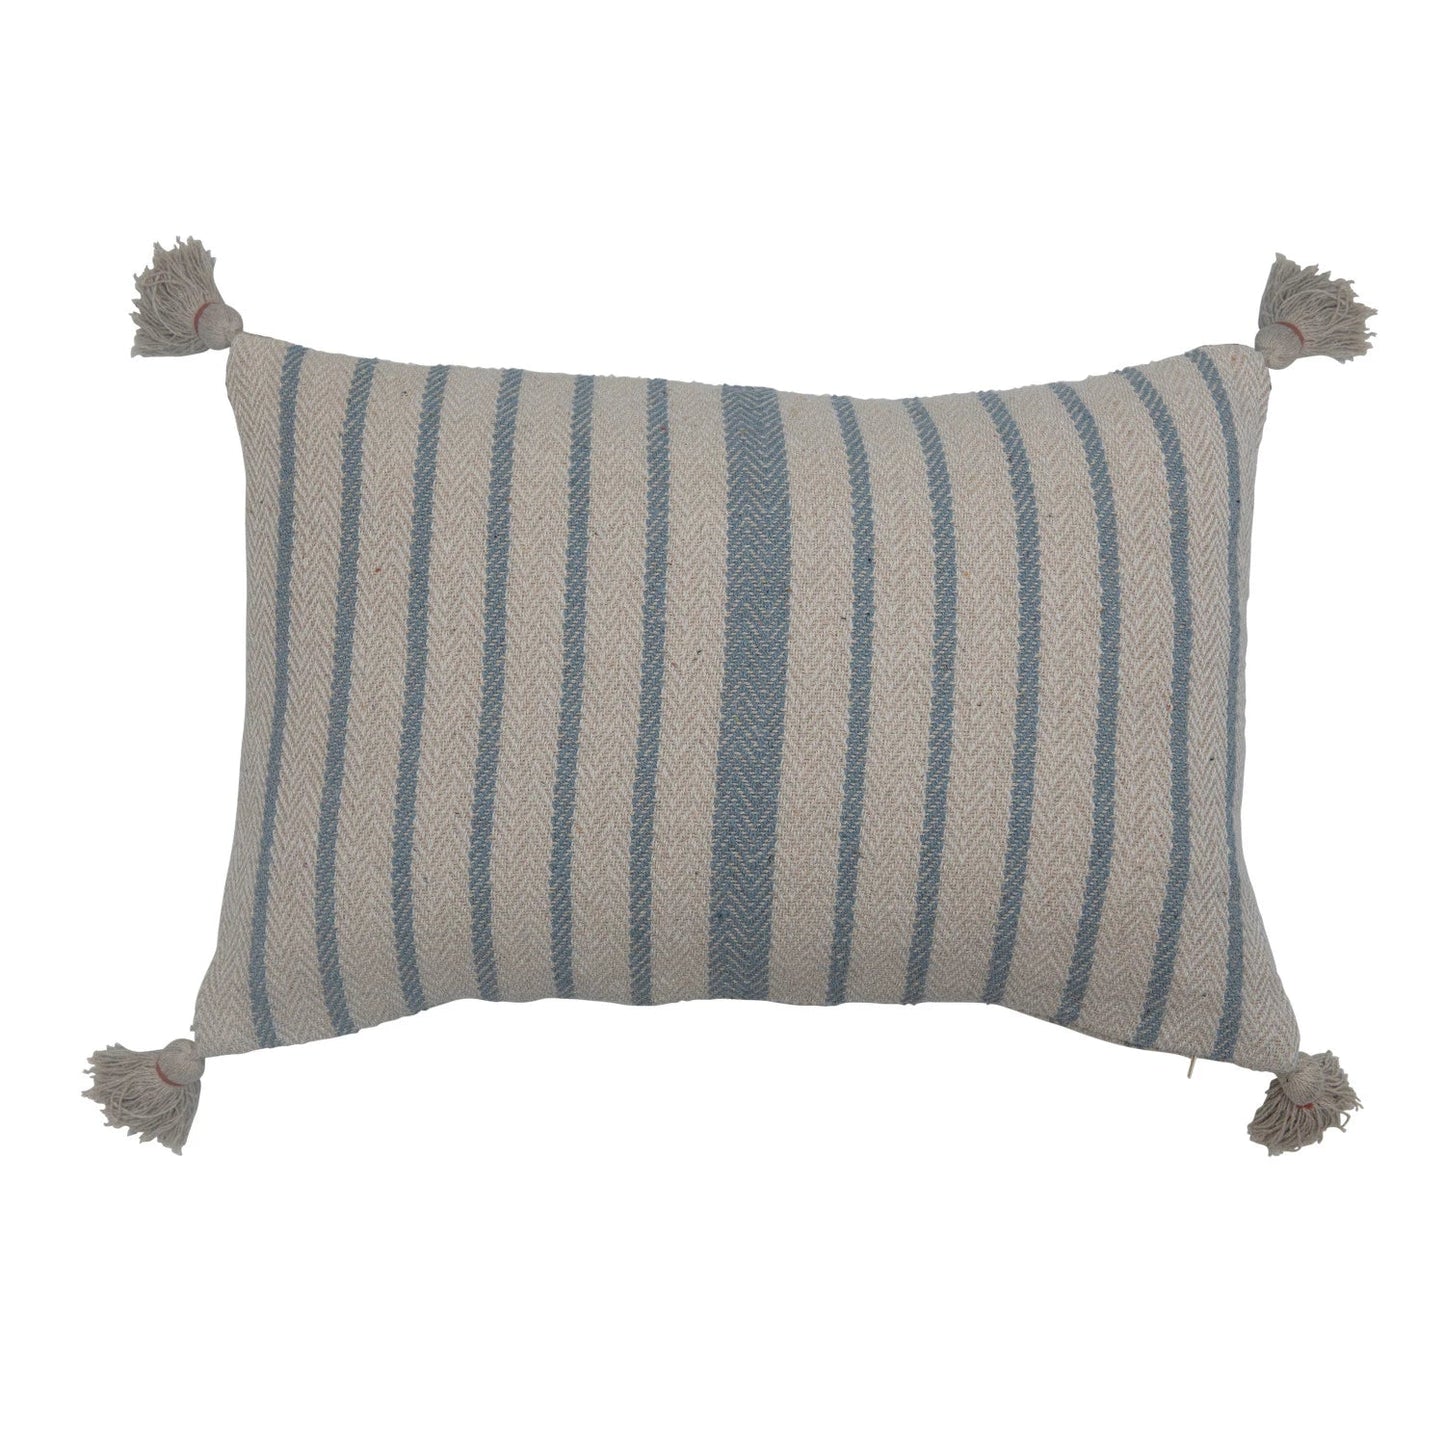 Woven Recycled Cotton Blend Lumbar Pillow & Tassels - The Riviera Towel Company